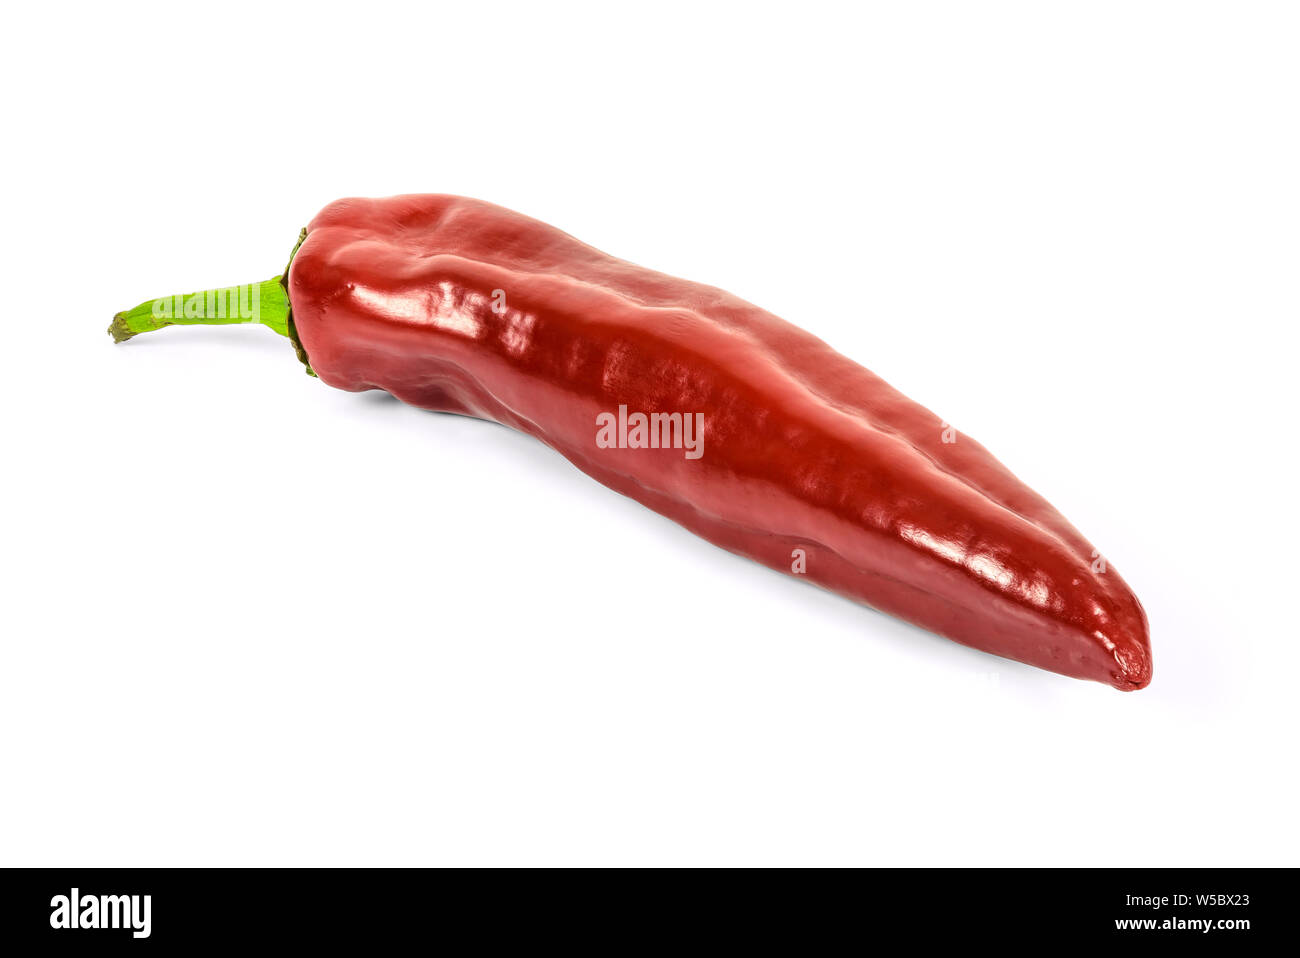 Red pepper isolated on white background with clipping path Stock Photo